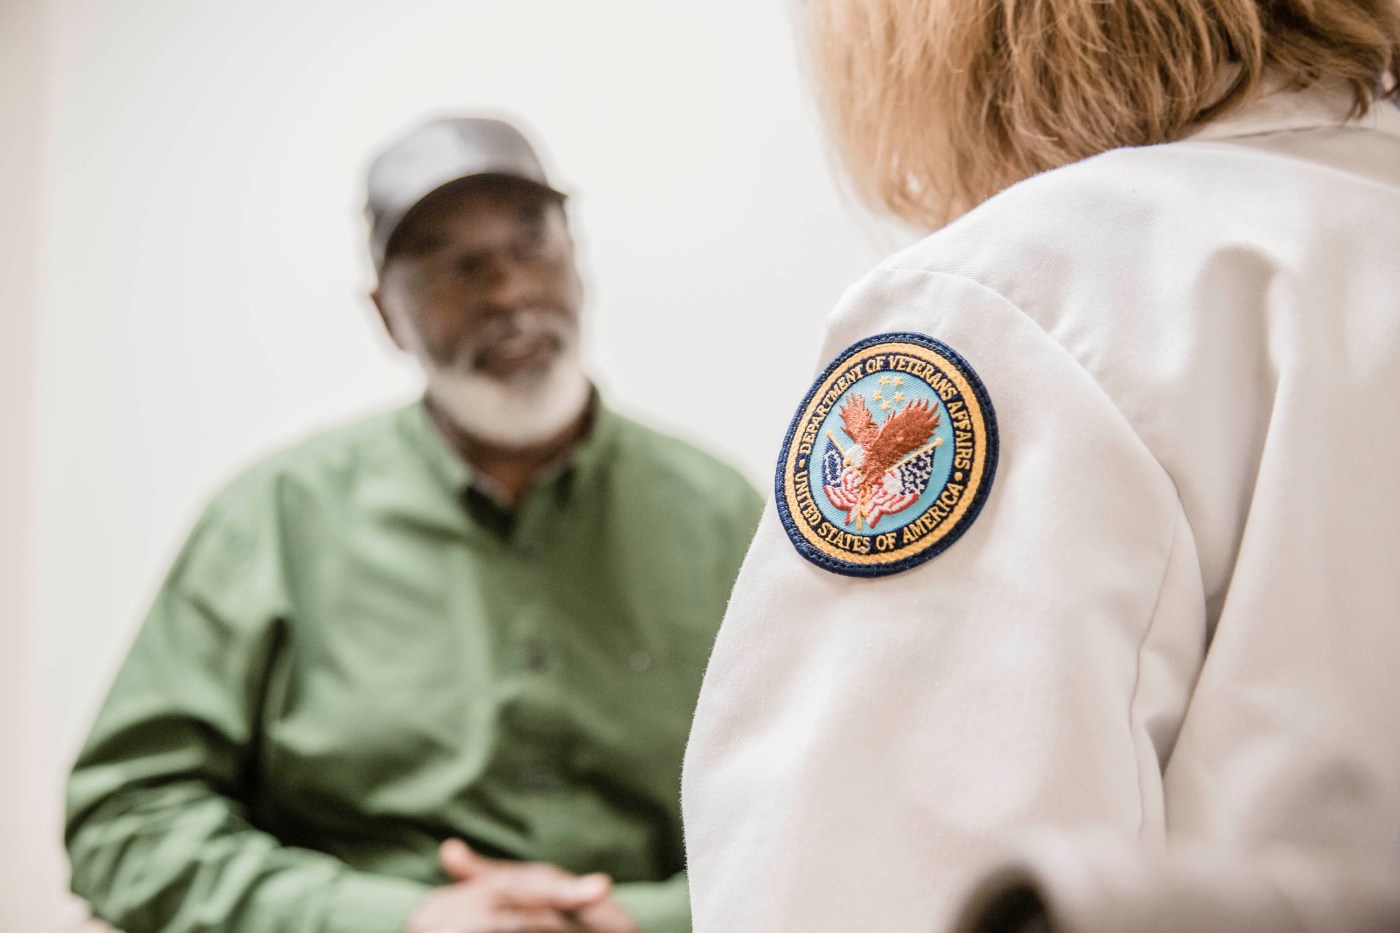 Staying proactive in caring for our Veterans